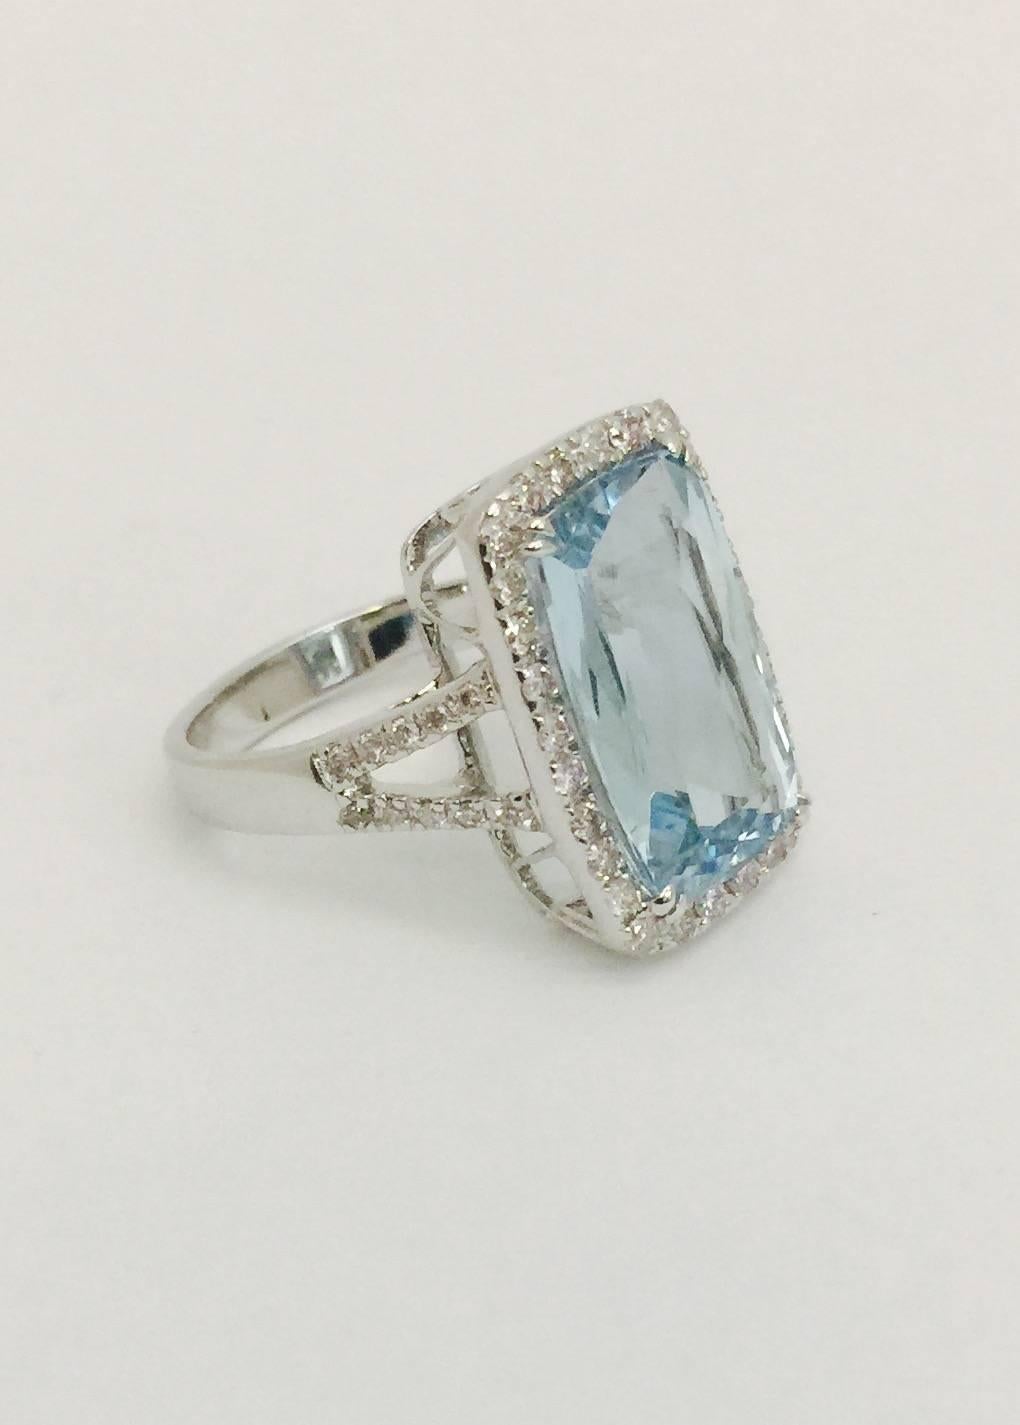 Aquamarine translates to "Water of The Sea".  This spectacular ring, crafted in 18 karat white gold boasts a stunningly clear and immaculately faceted emerald cut aquamarine weighing 7.19 carats.  Accented with white diamond micro pave